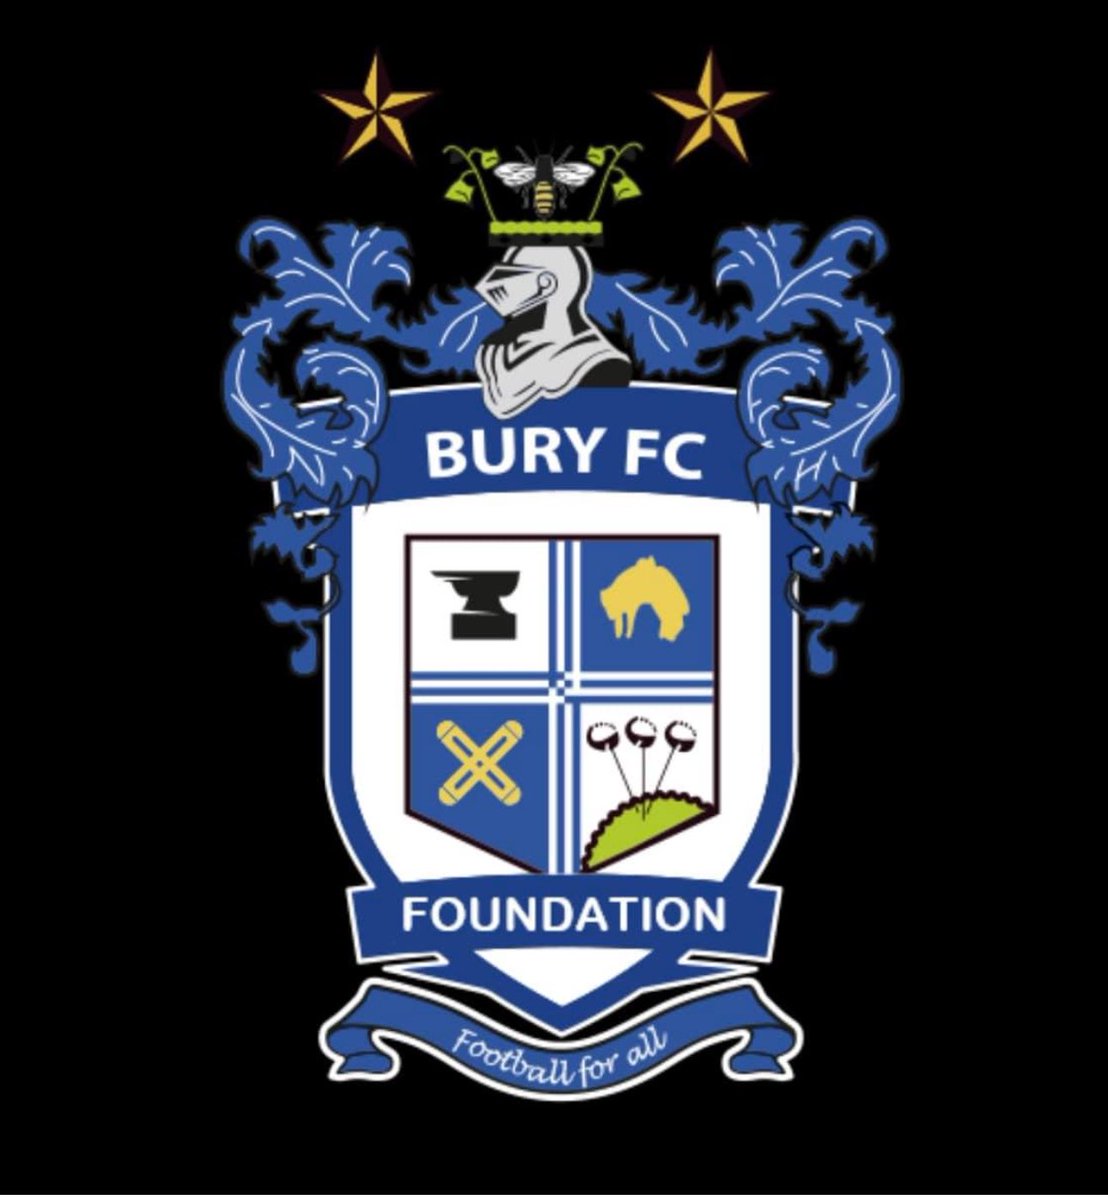 Bury Football Club Foundation are looking for a couple of experienced/ strong defenders to join them next season. Mid/high ability U14 (year 9) 24/25. Training at Goshen Sports Centre, Bury on Wednesdays and playing Saturdays. @TheDerbyHighPE